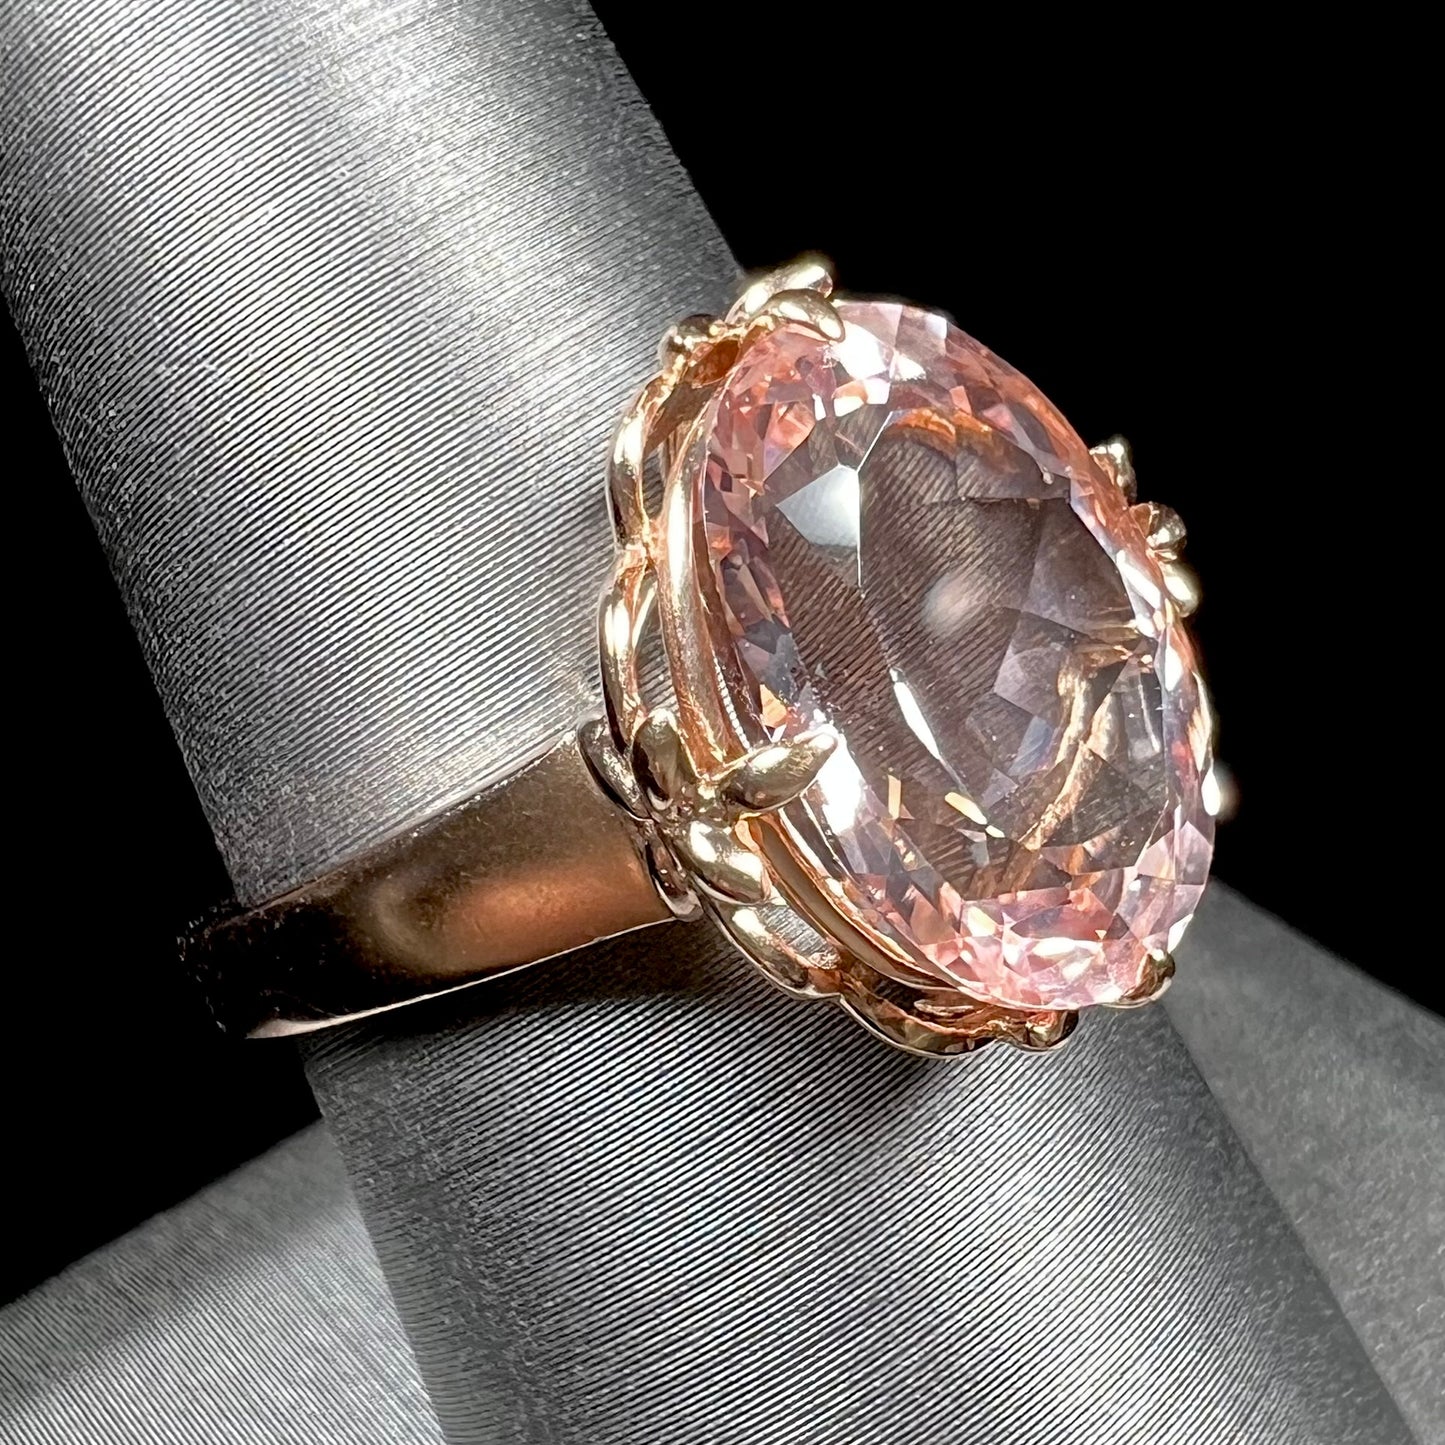 A ladies' rose gold solitaire ring set with an oval cut pink morganite gemstone.